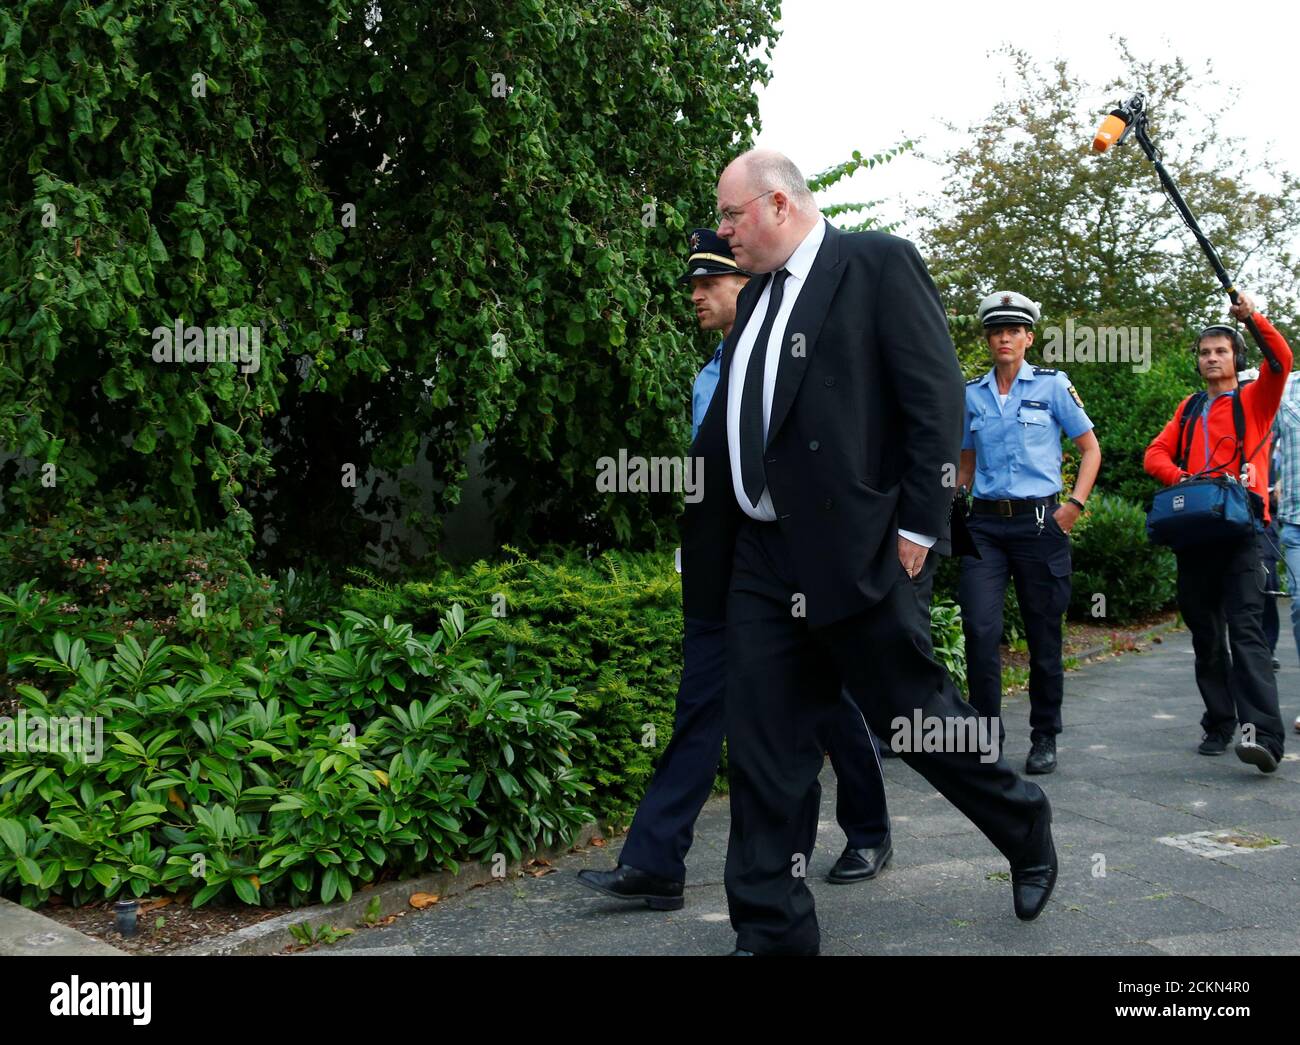 Walter Kohl, son of former German Chancellor Helmut Kohl arrives at his fathers home in Oggersheim, Germany, June 16, 2017.     REUTERS/Ralph Orlowski Stock Photo